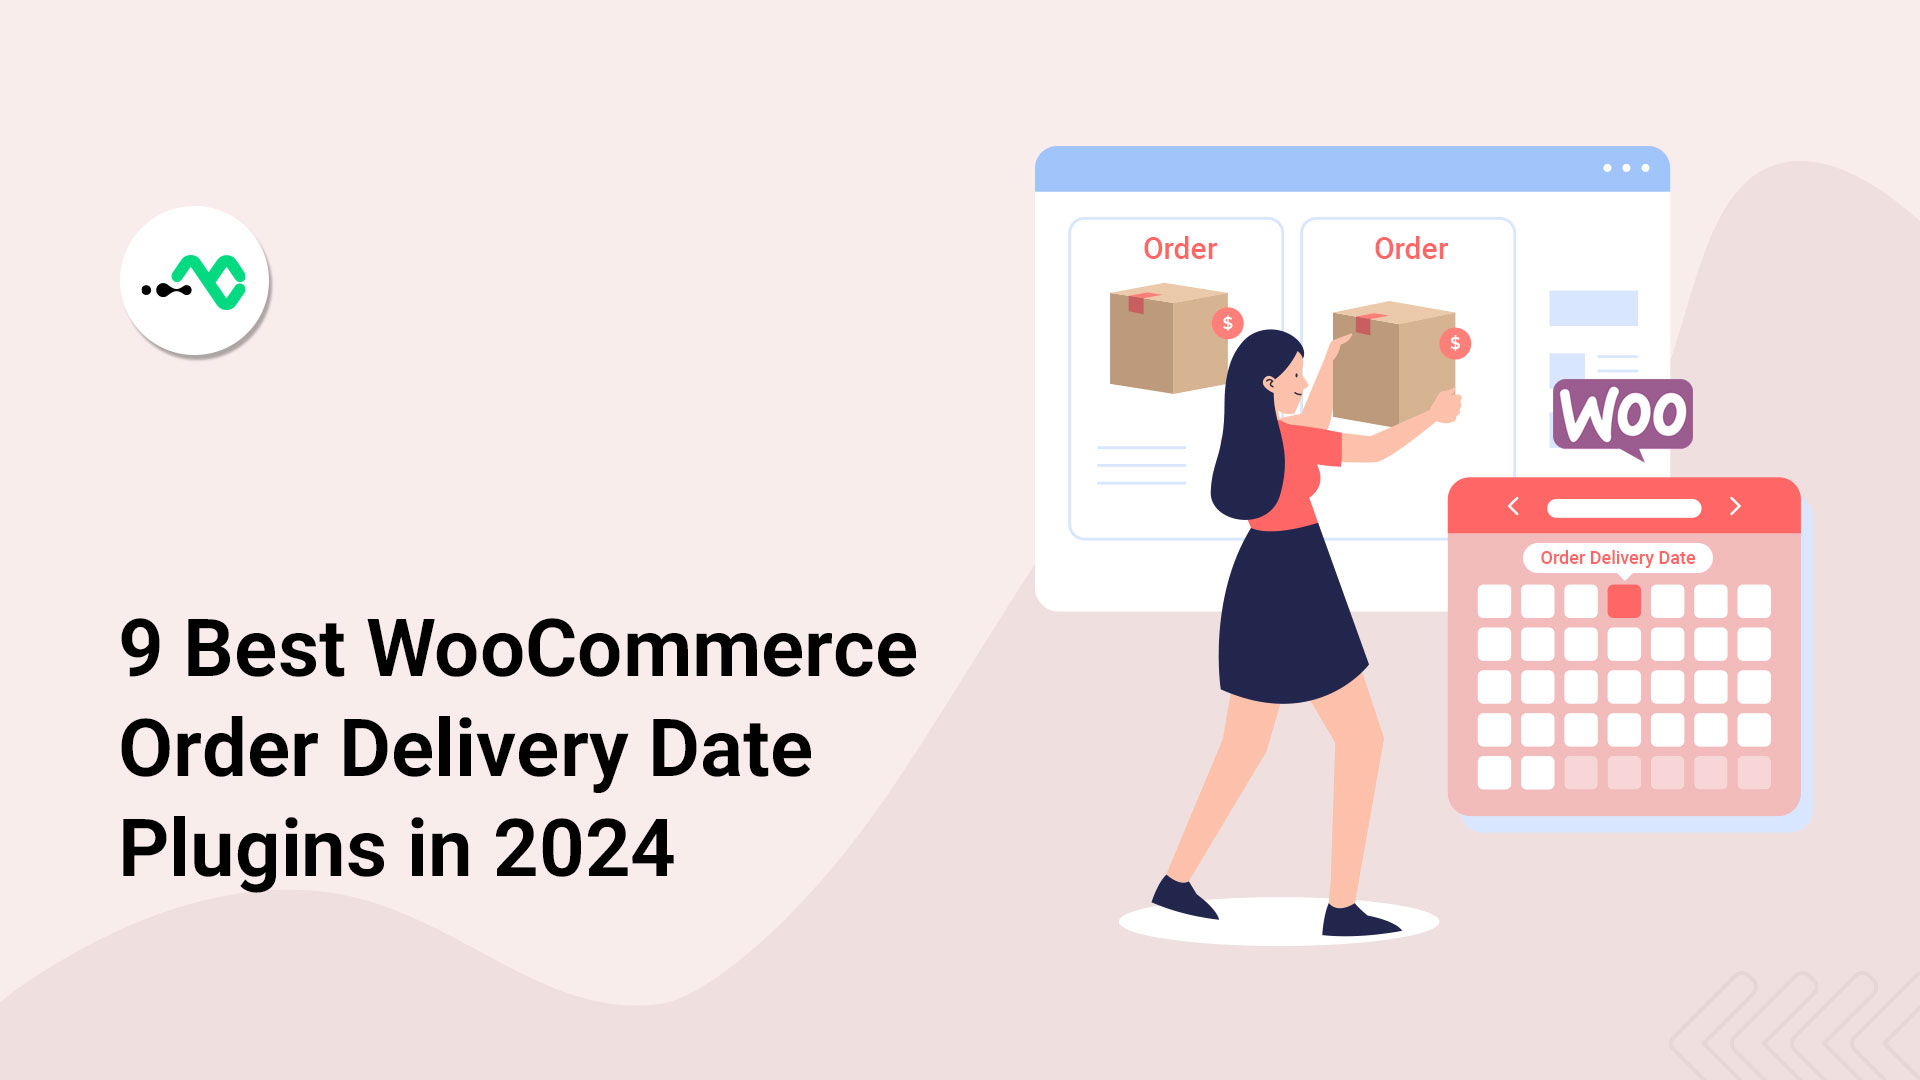 Best WooCommerce Order Delivery Date Plugins